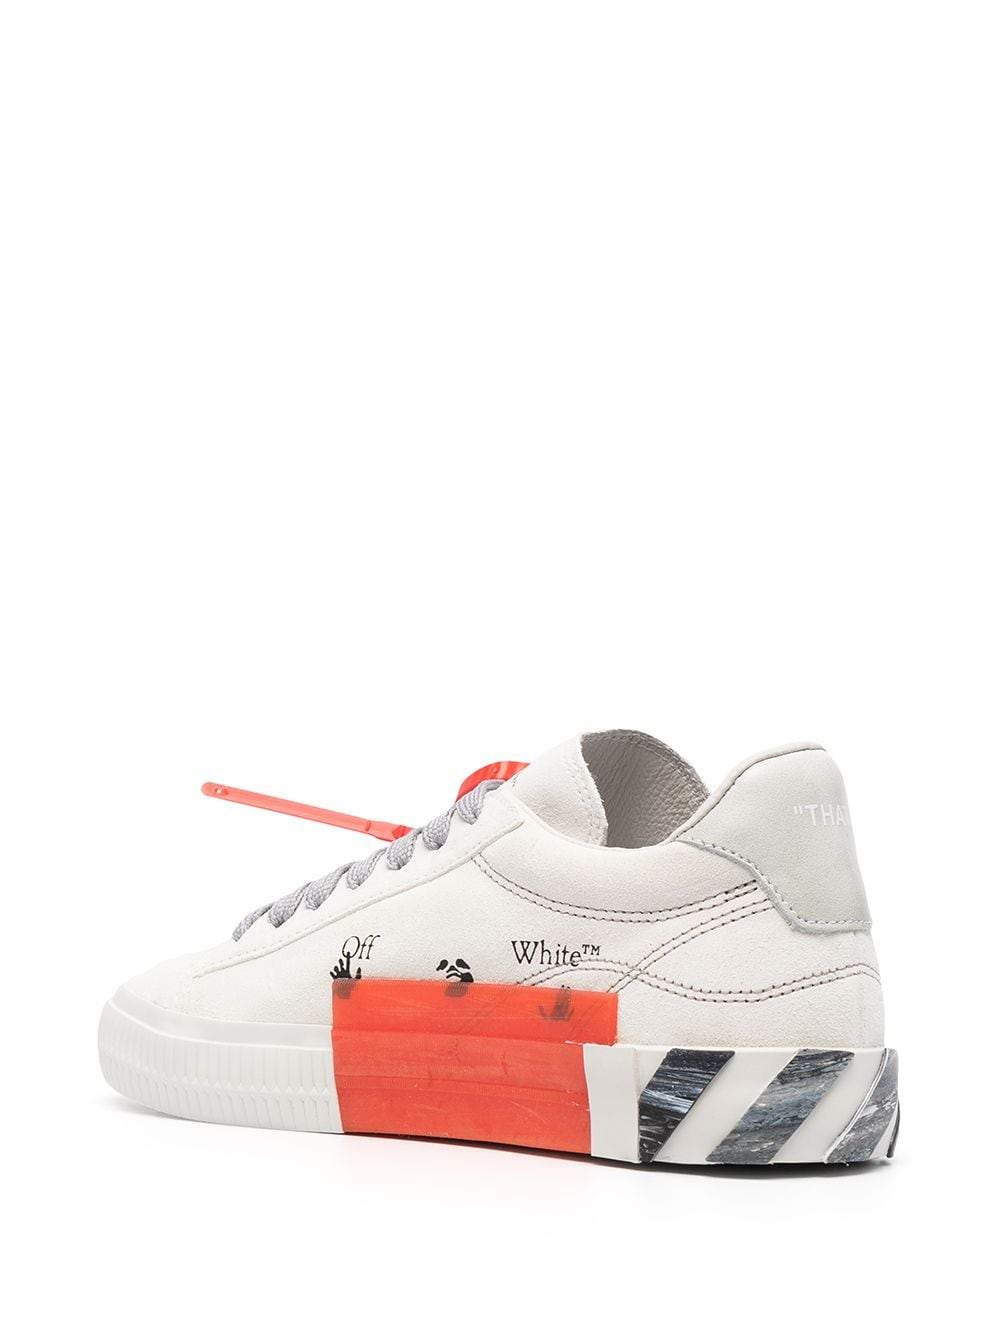 OFF-WHITE WOMEN Arrows vulcanised low-top sneakers White/Grey - MAISONDEFASHION.COM